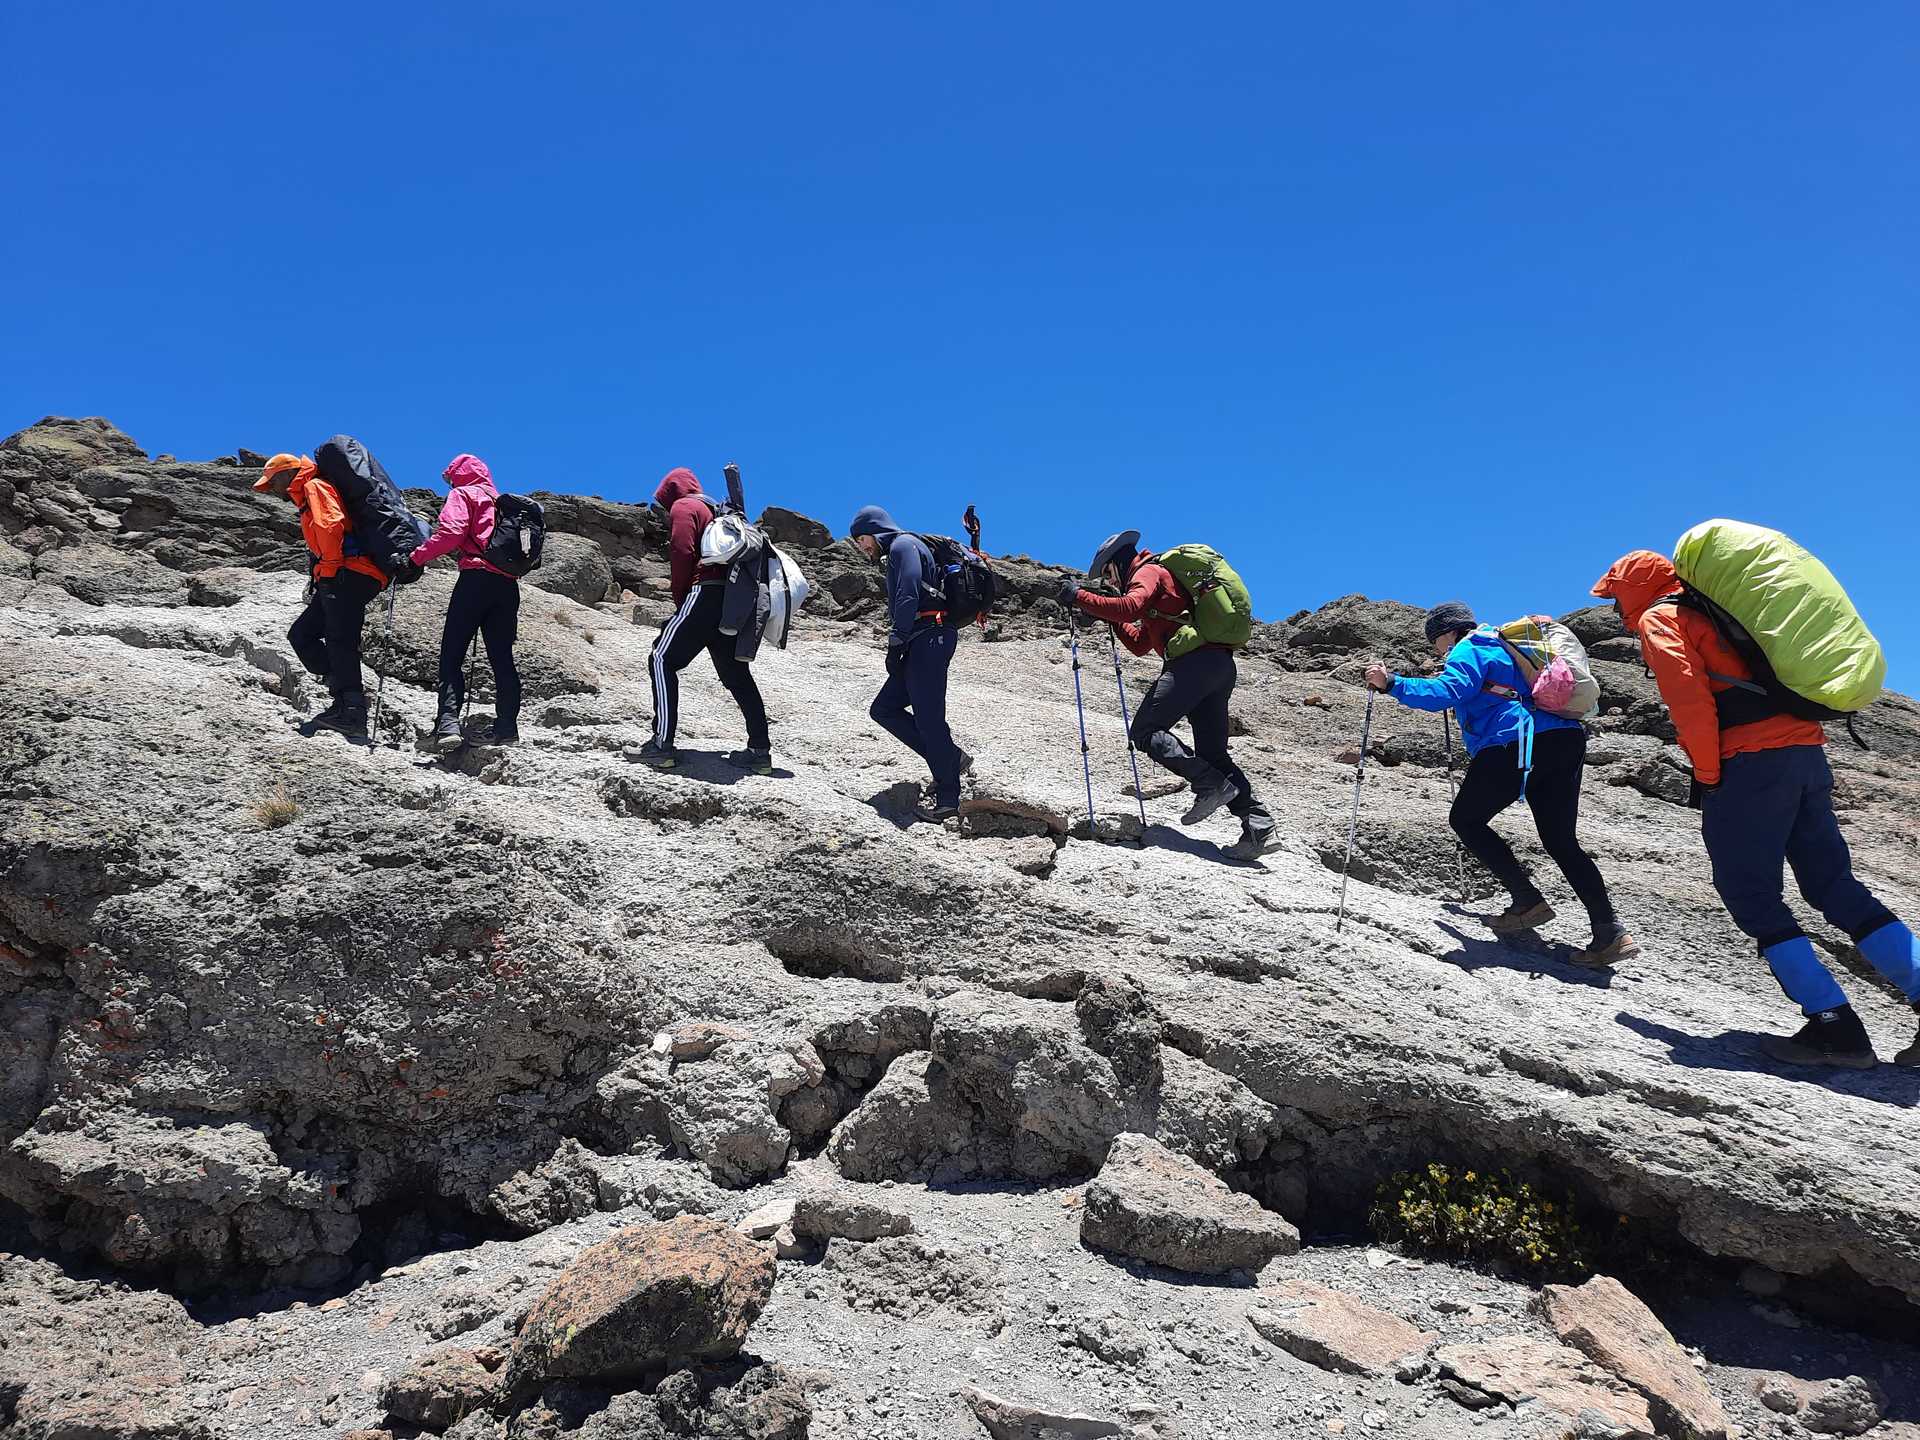 5 Simple Ways To Avoid The Crowds While Climbing Kilimanjaro